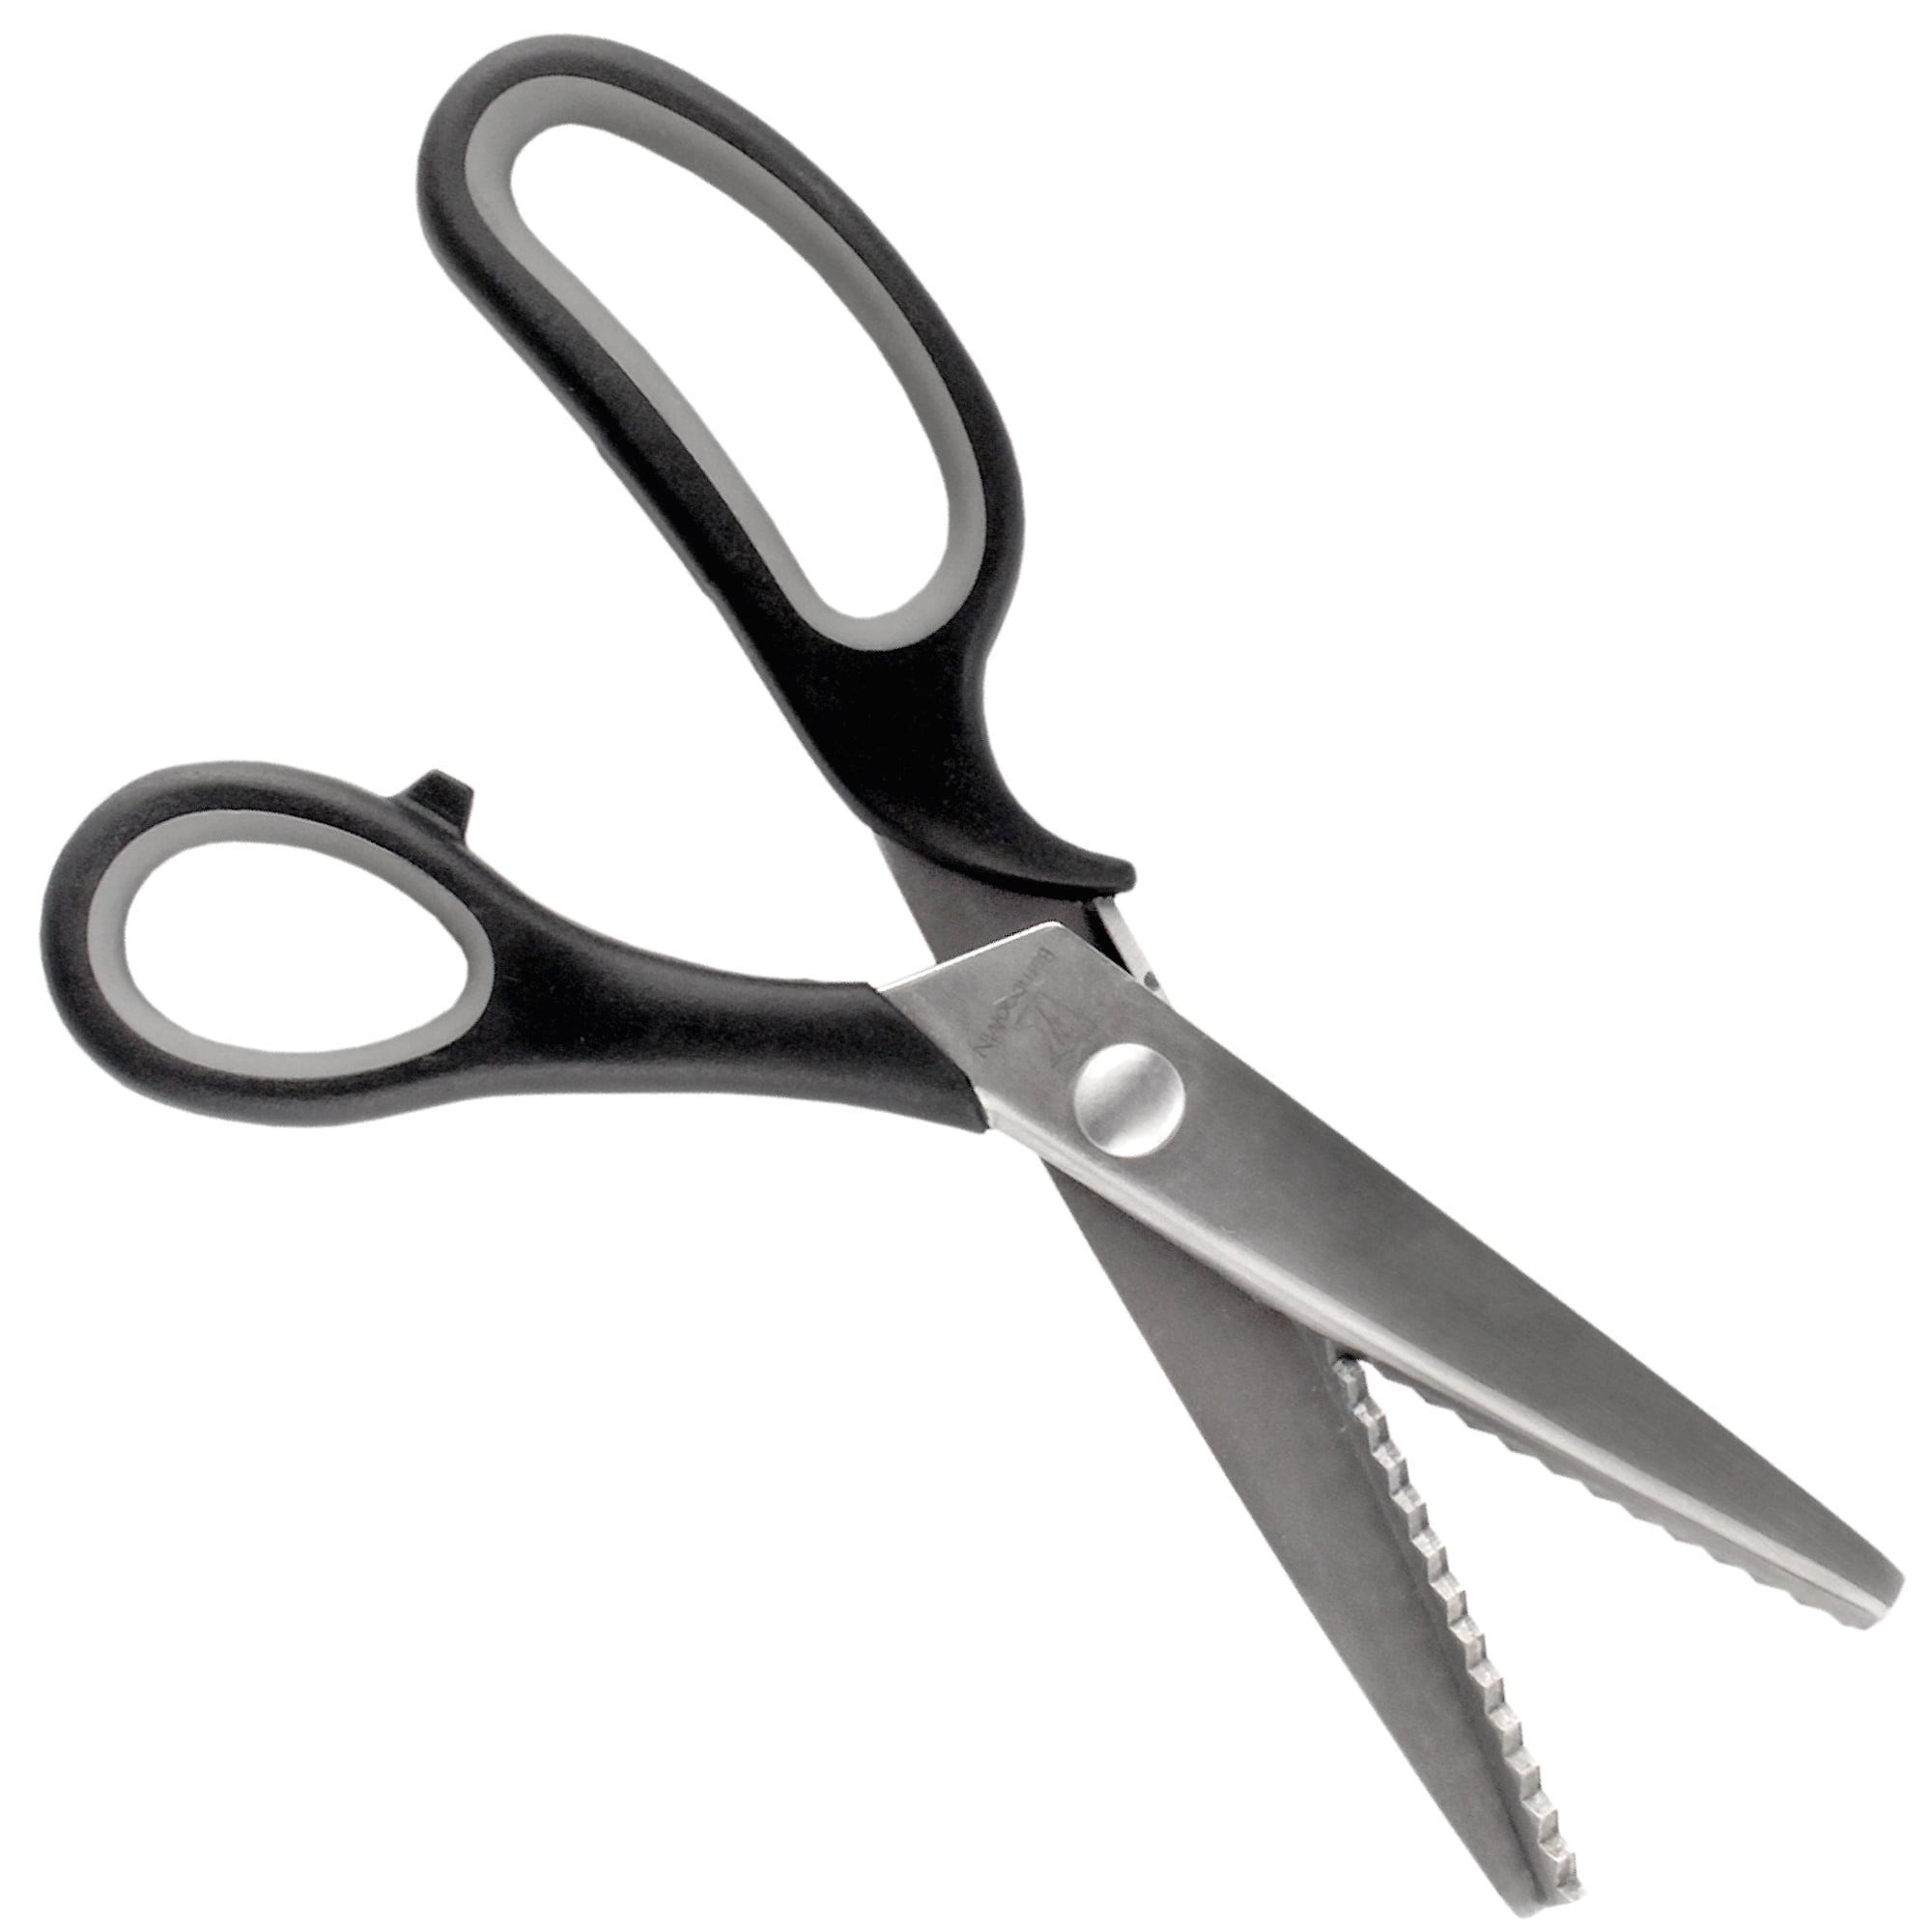 Pinking Shears for Quilting and Sewing - MyNotions